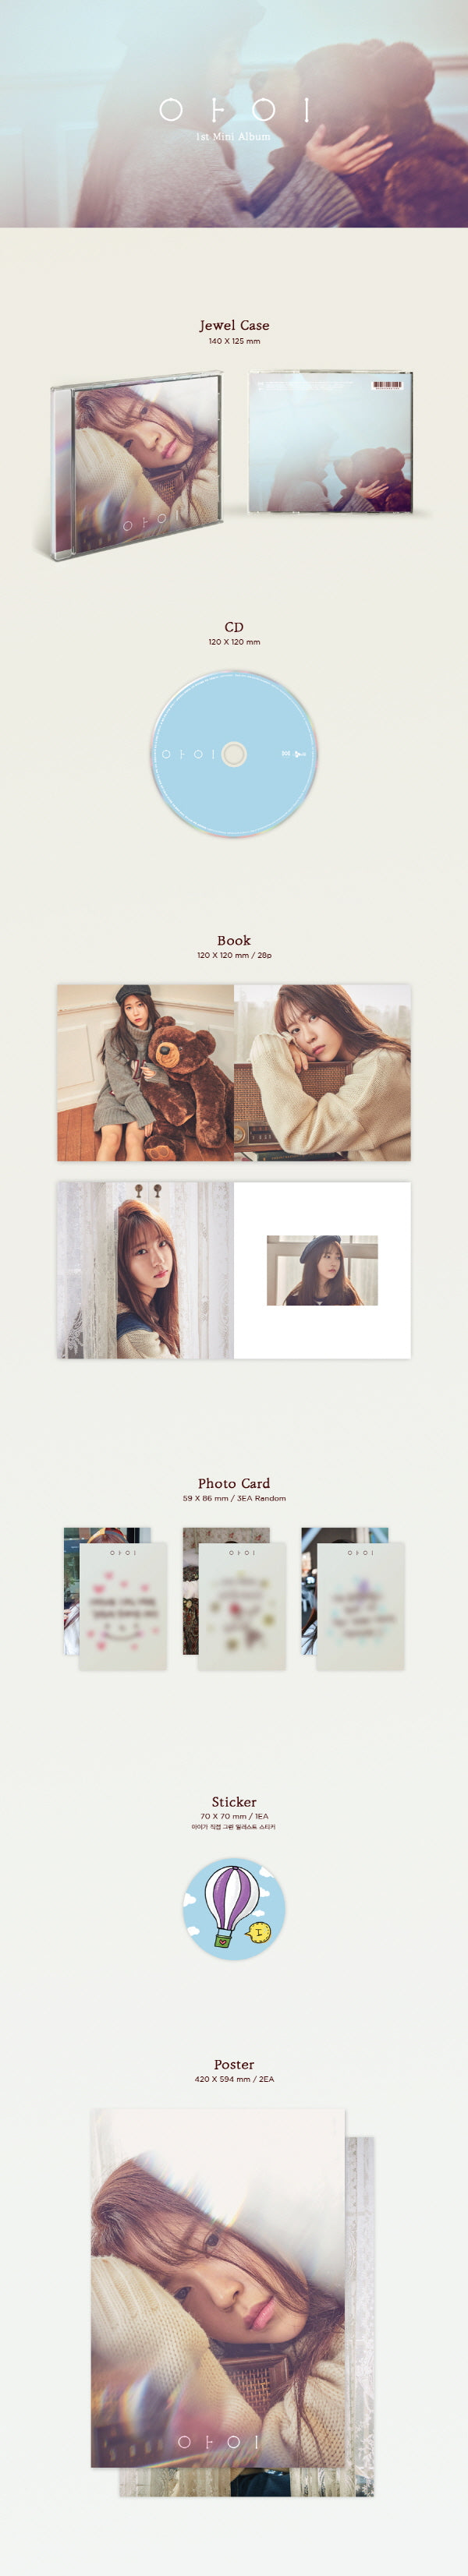 1 CD
1 Photo Book (28 pages)
1 Photo Card
1 Sticker